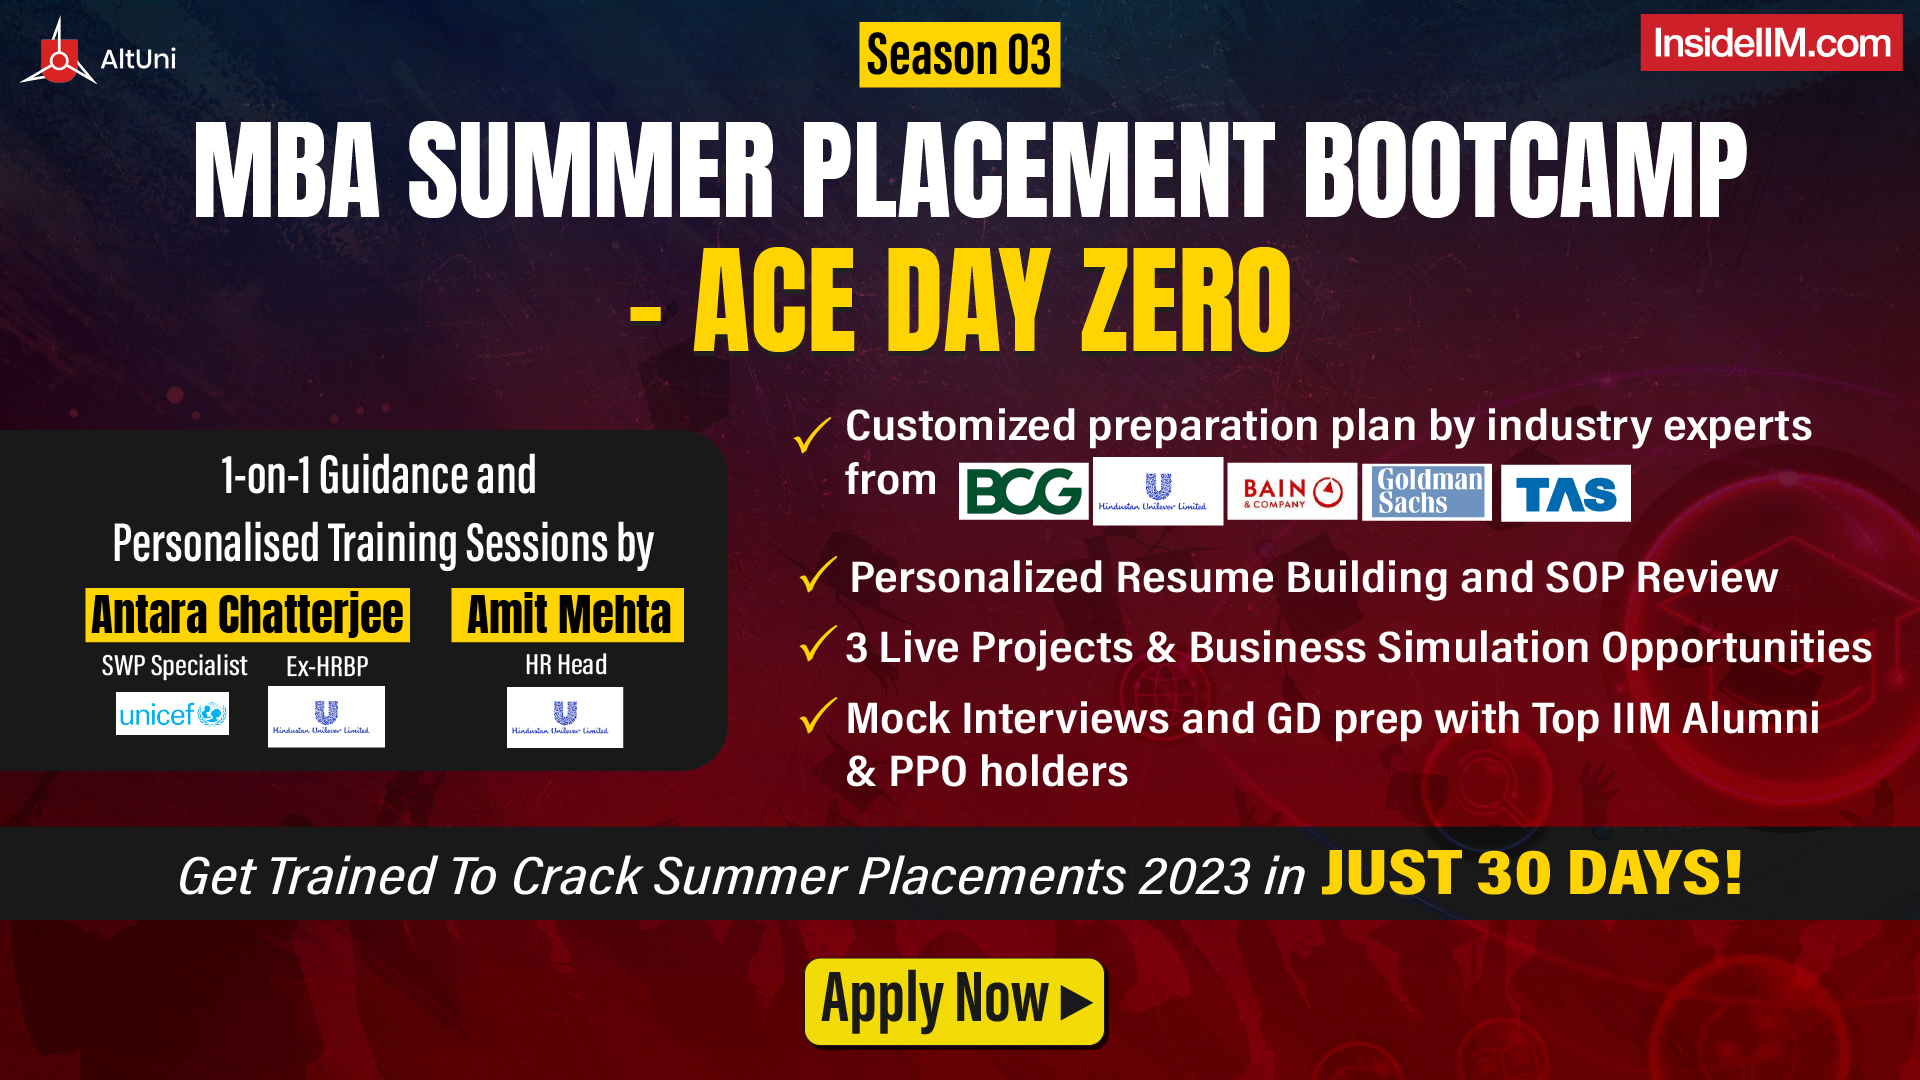 MBA Summer Placement Bootcamp - Ace Day Zero